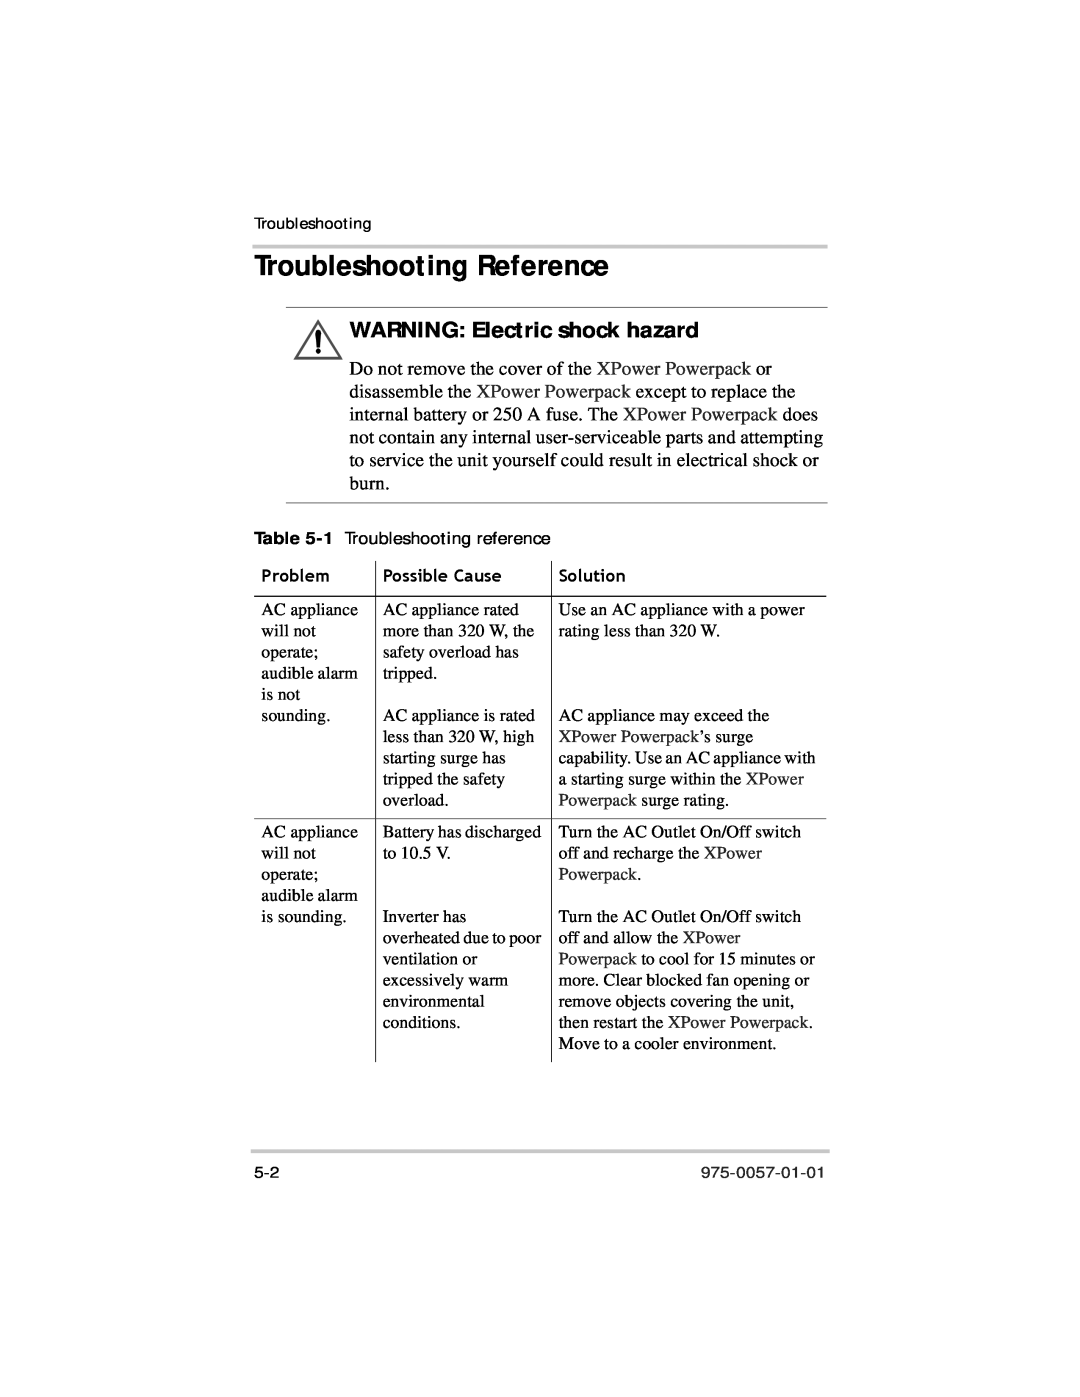 Xantrex Technology 975-0057-01-01 Troubleshooting Reference, WARNING Electric shock hazard, 1 Troubleshooting reference 